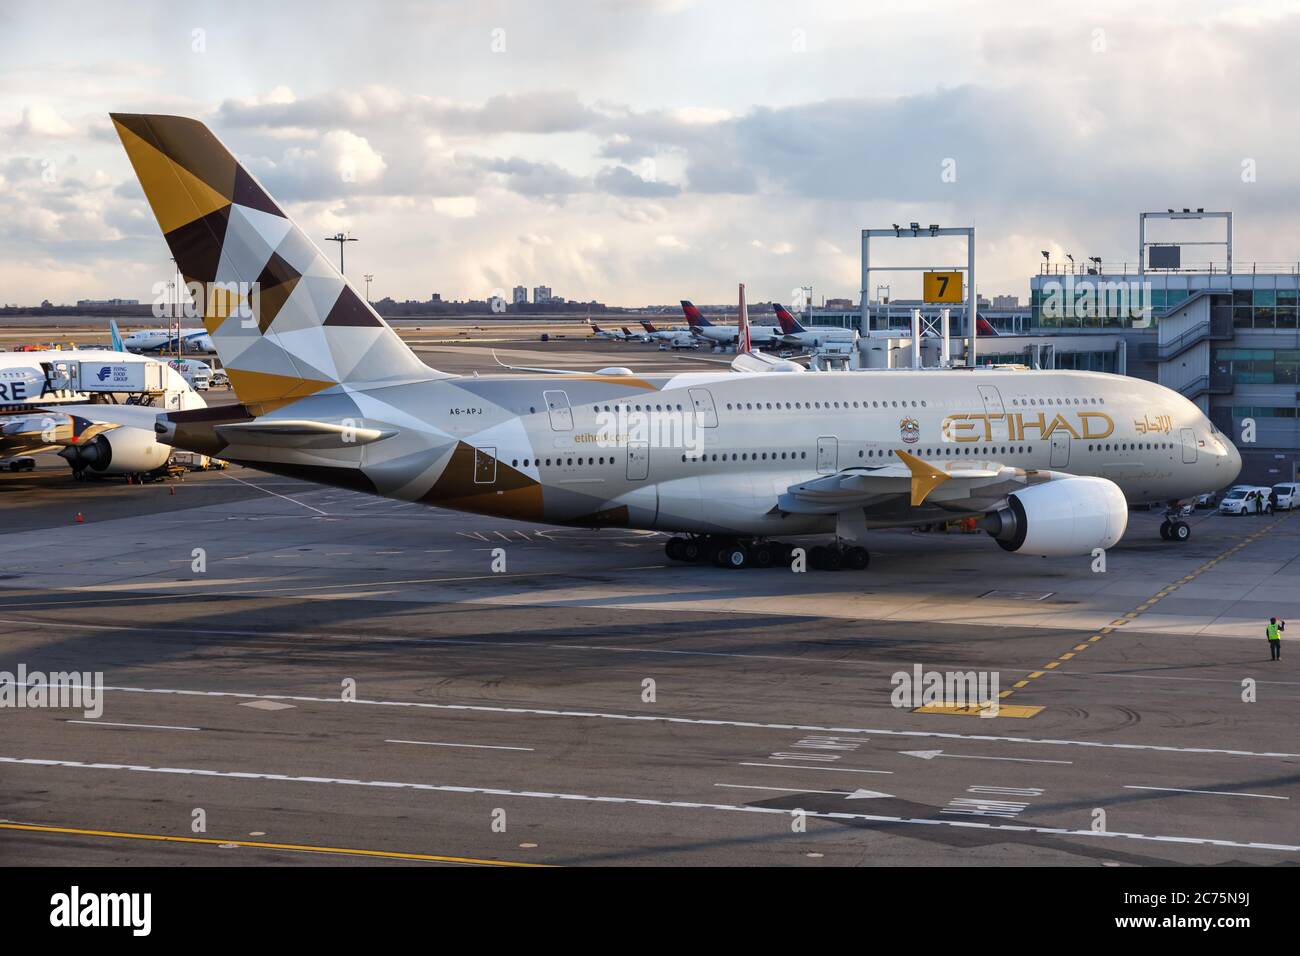 New York City, New York - February 29, 2020: Etihad Airbus A380-800 airplane at New York JFK Airport in the United States. Airbus is a European aircra Stock Photo